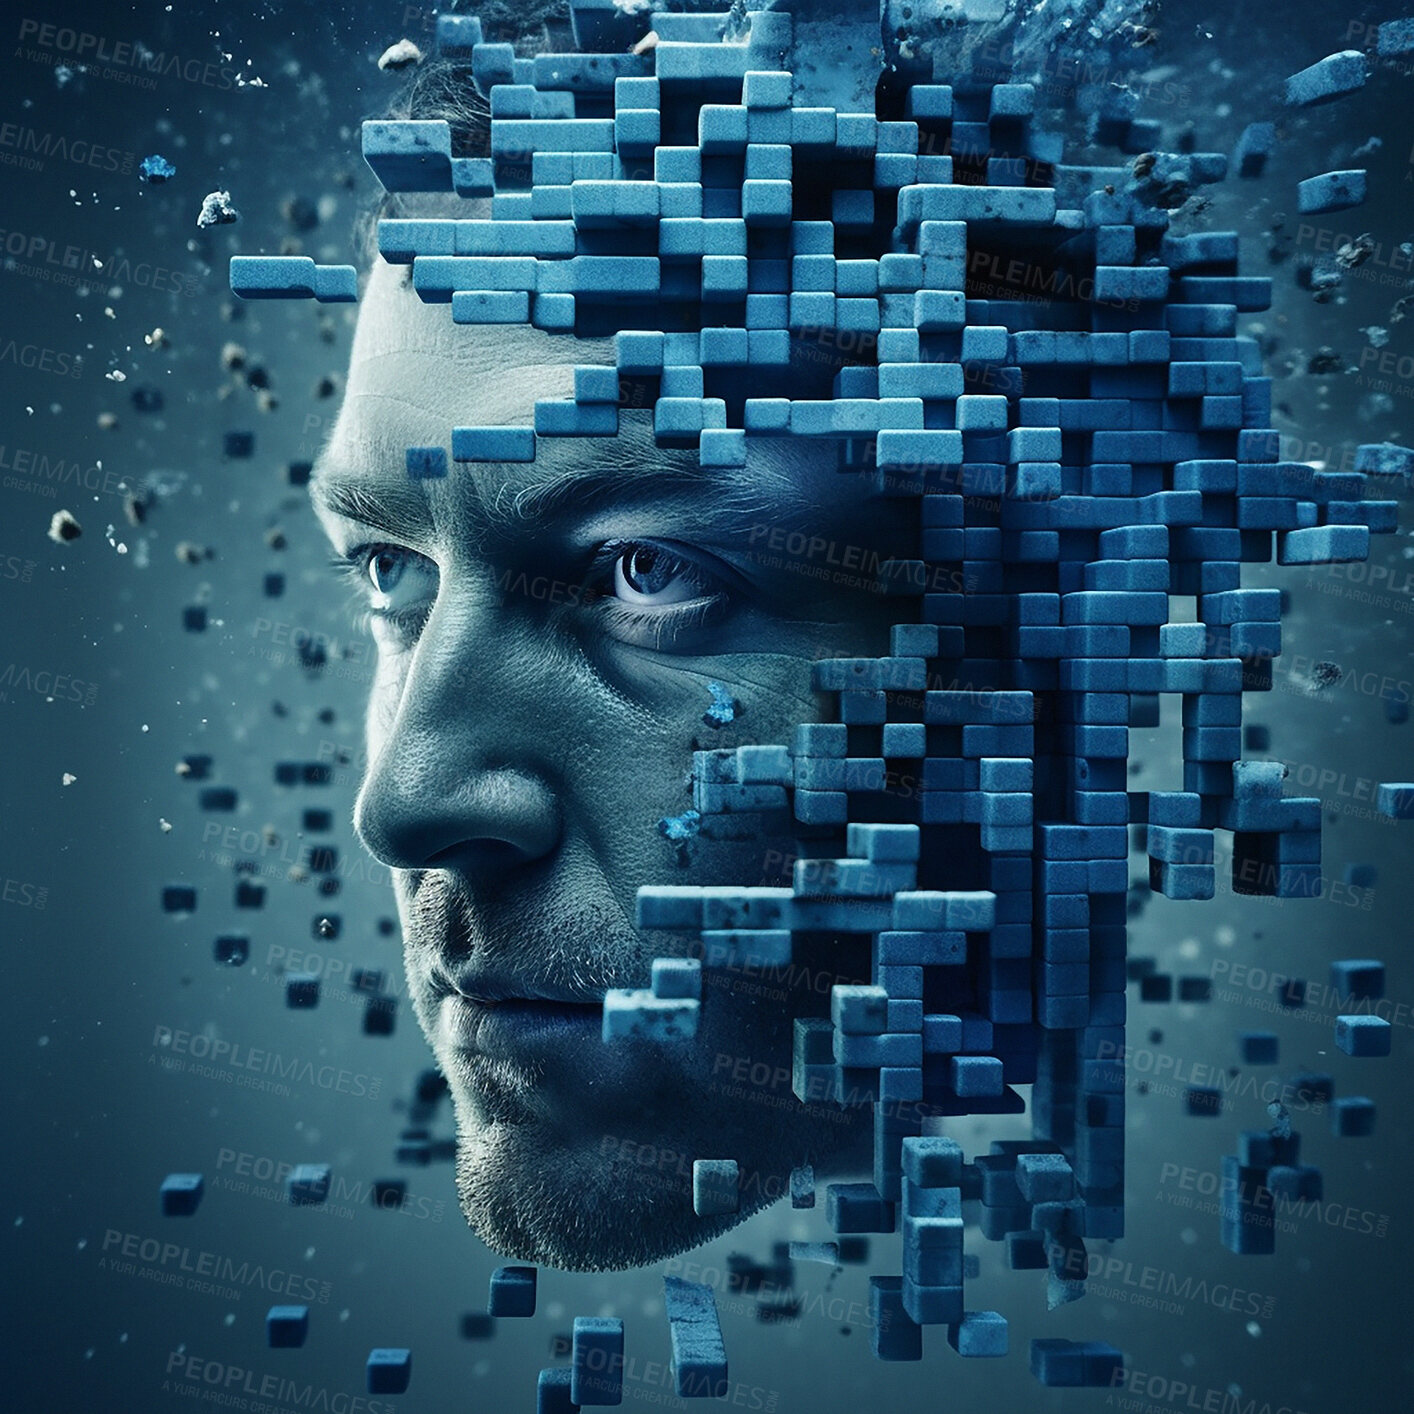 Buy stock photo Face, abstract and futuristic with innovation, cubes or technology with robotics, connection or network. Minimalistic design, human head or artificial intelligence with future development or artistic